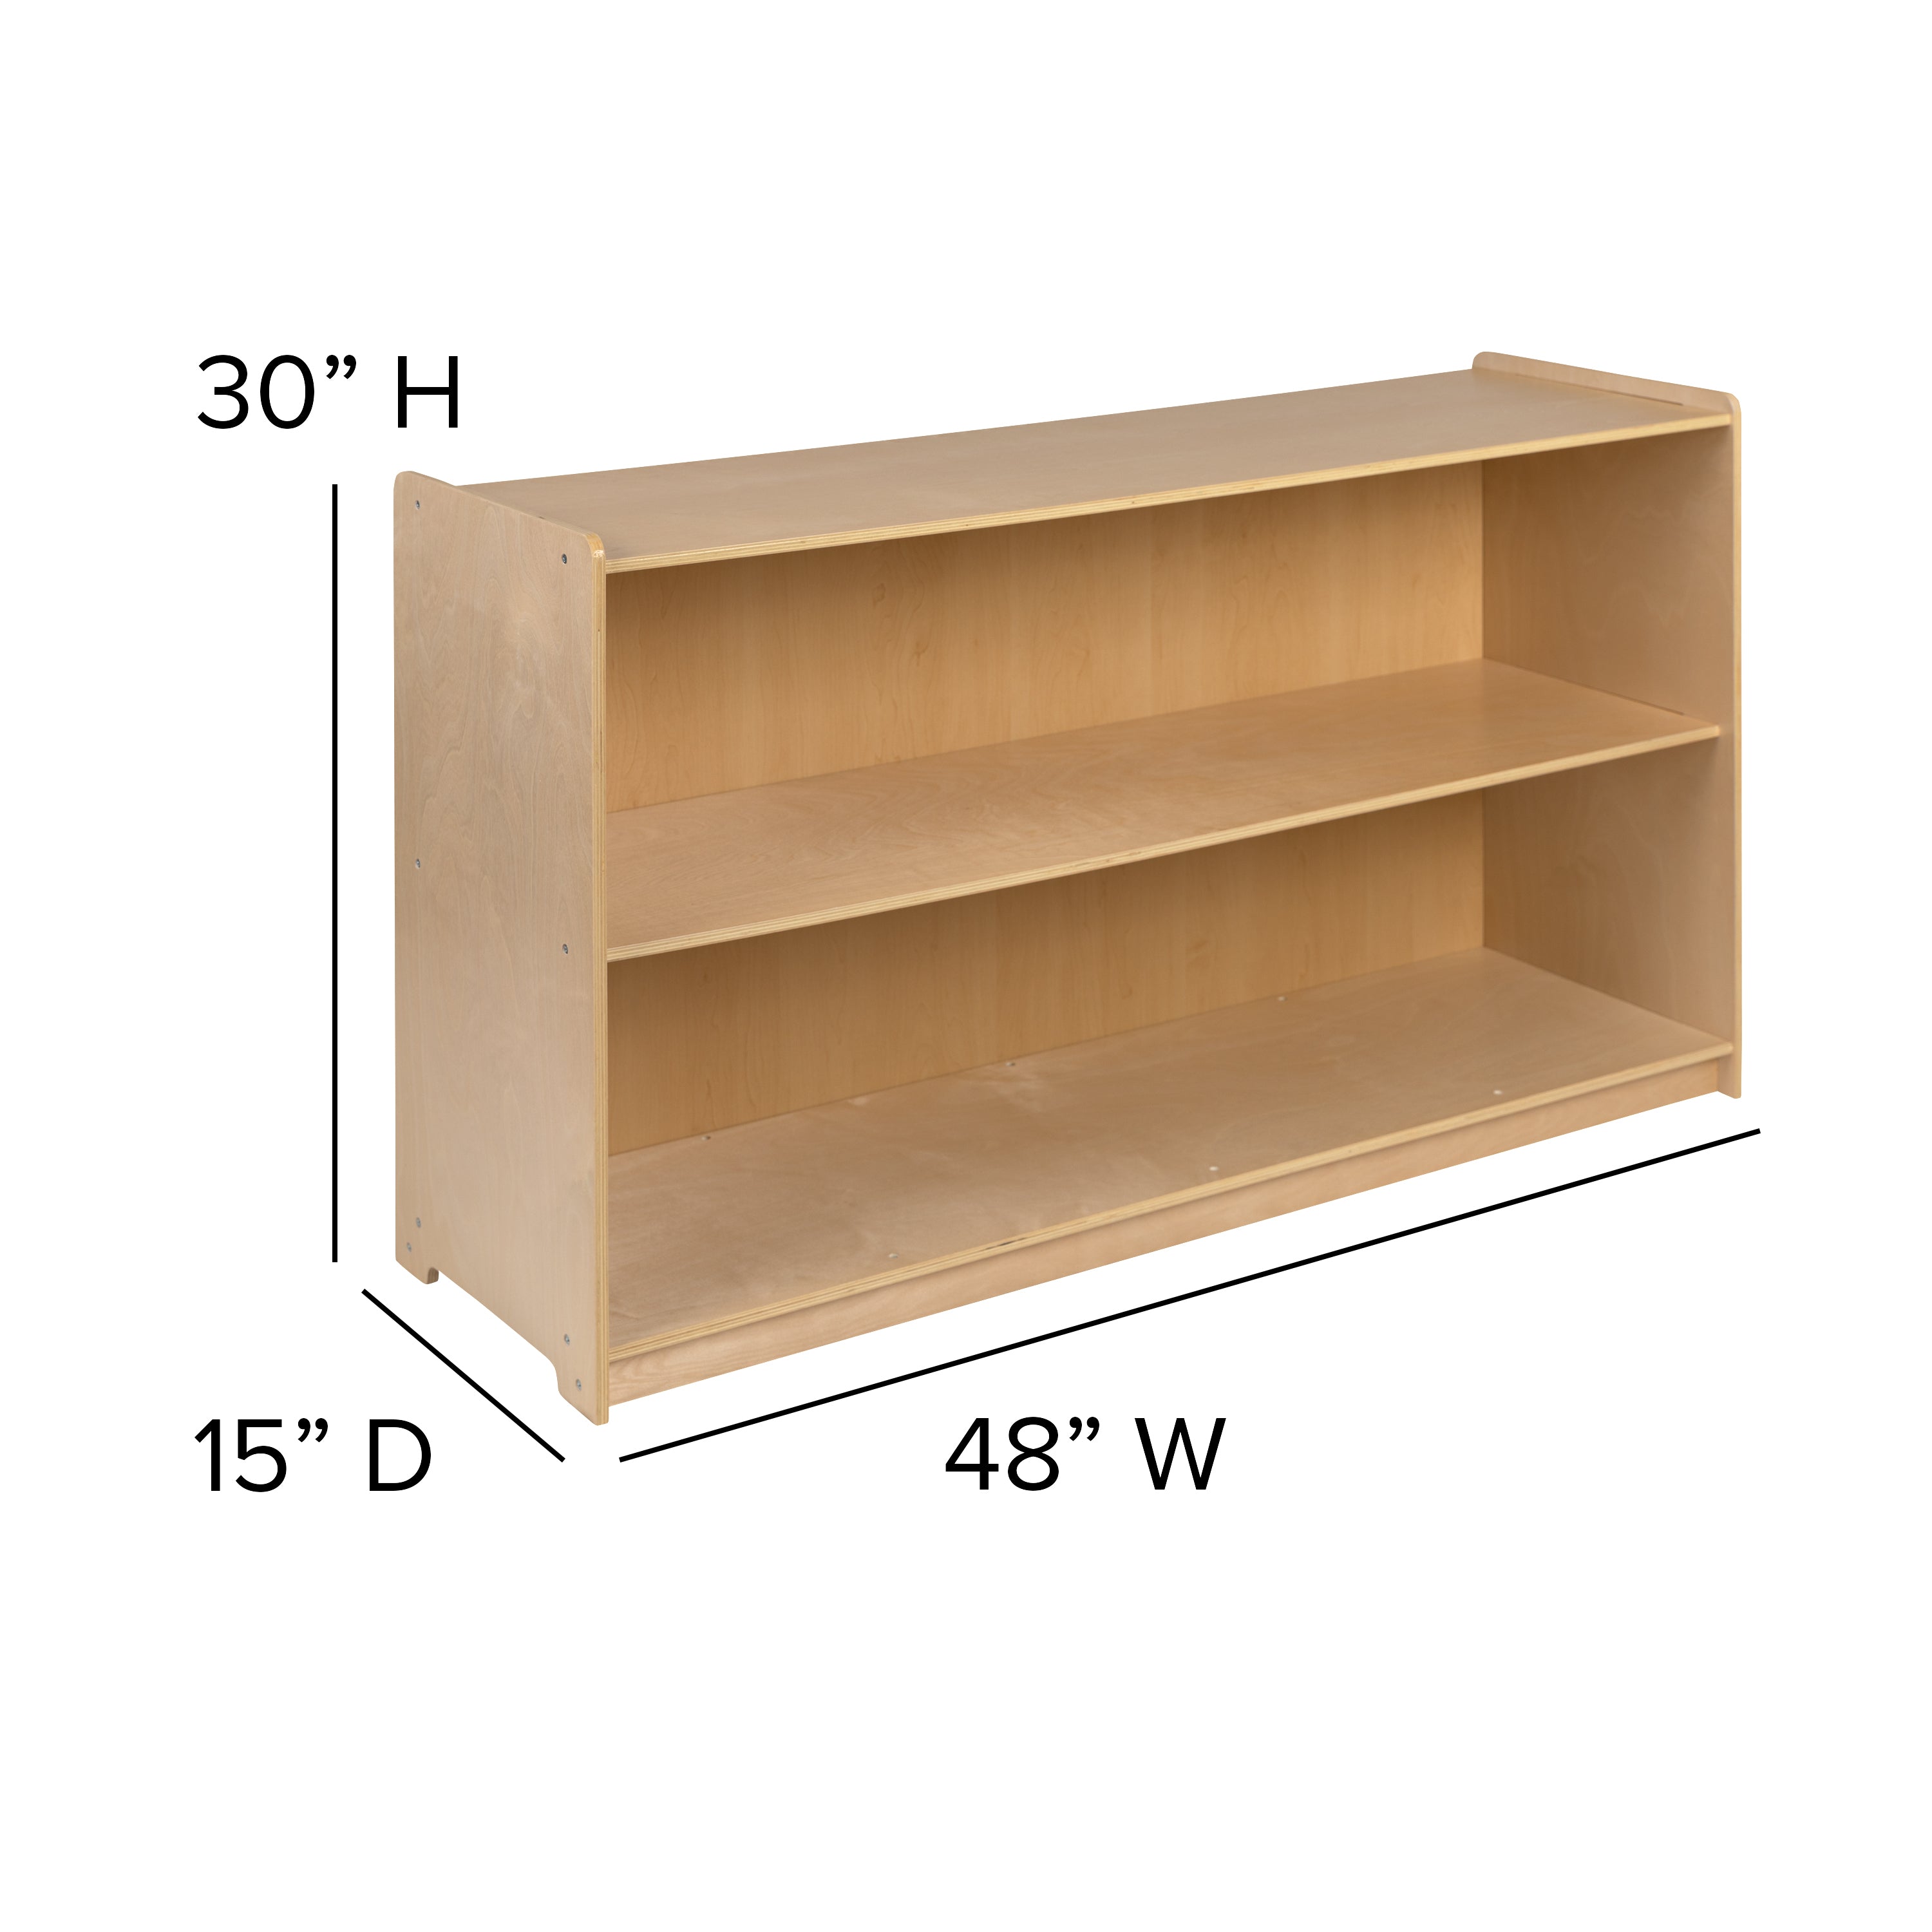 Wooden School Classroom Storage Cabinet for Commercial or Home Use - Safe, Kid Friendly Design (Natural)-Classroom Storage-Flash Furniture-Wall2Wall Furnishings